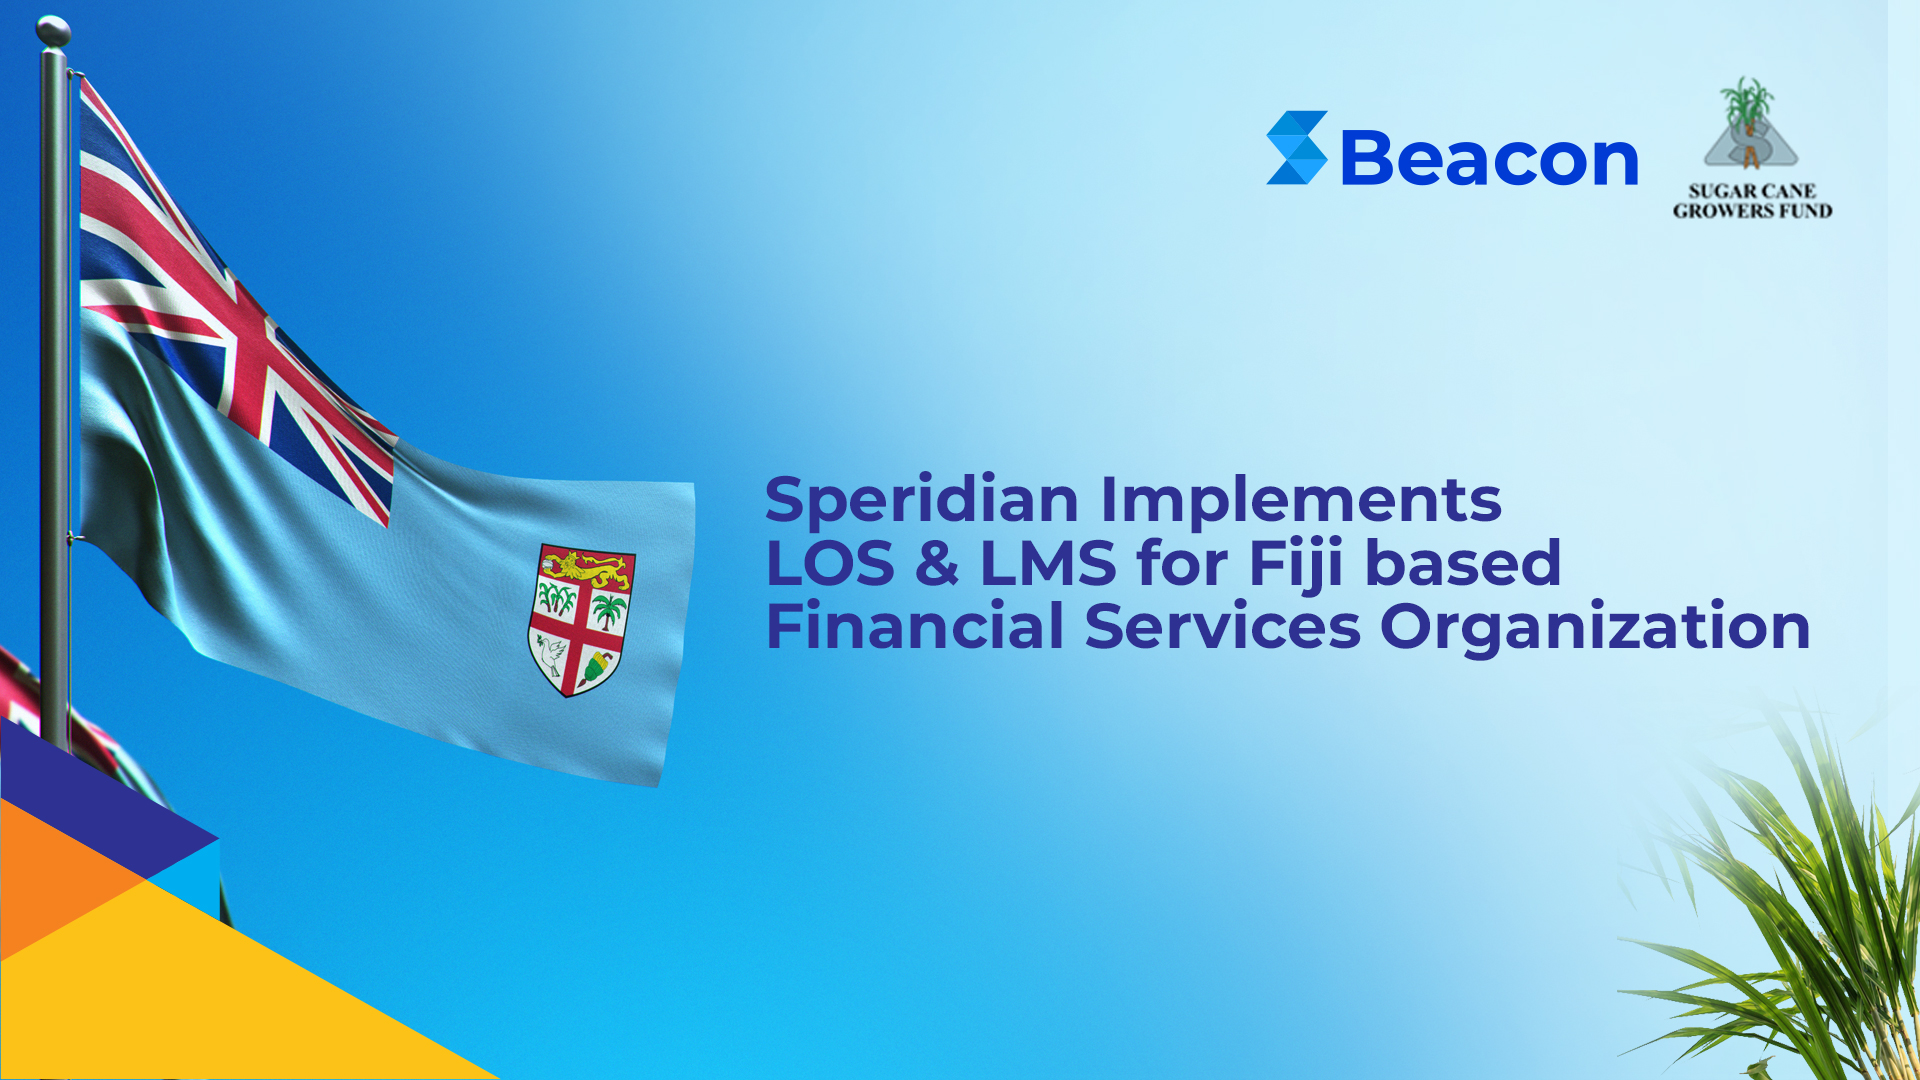 Speridian Implements LOS & LMS for Fiji based Financial Services Organization